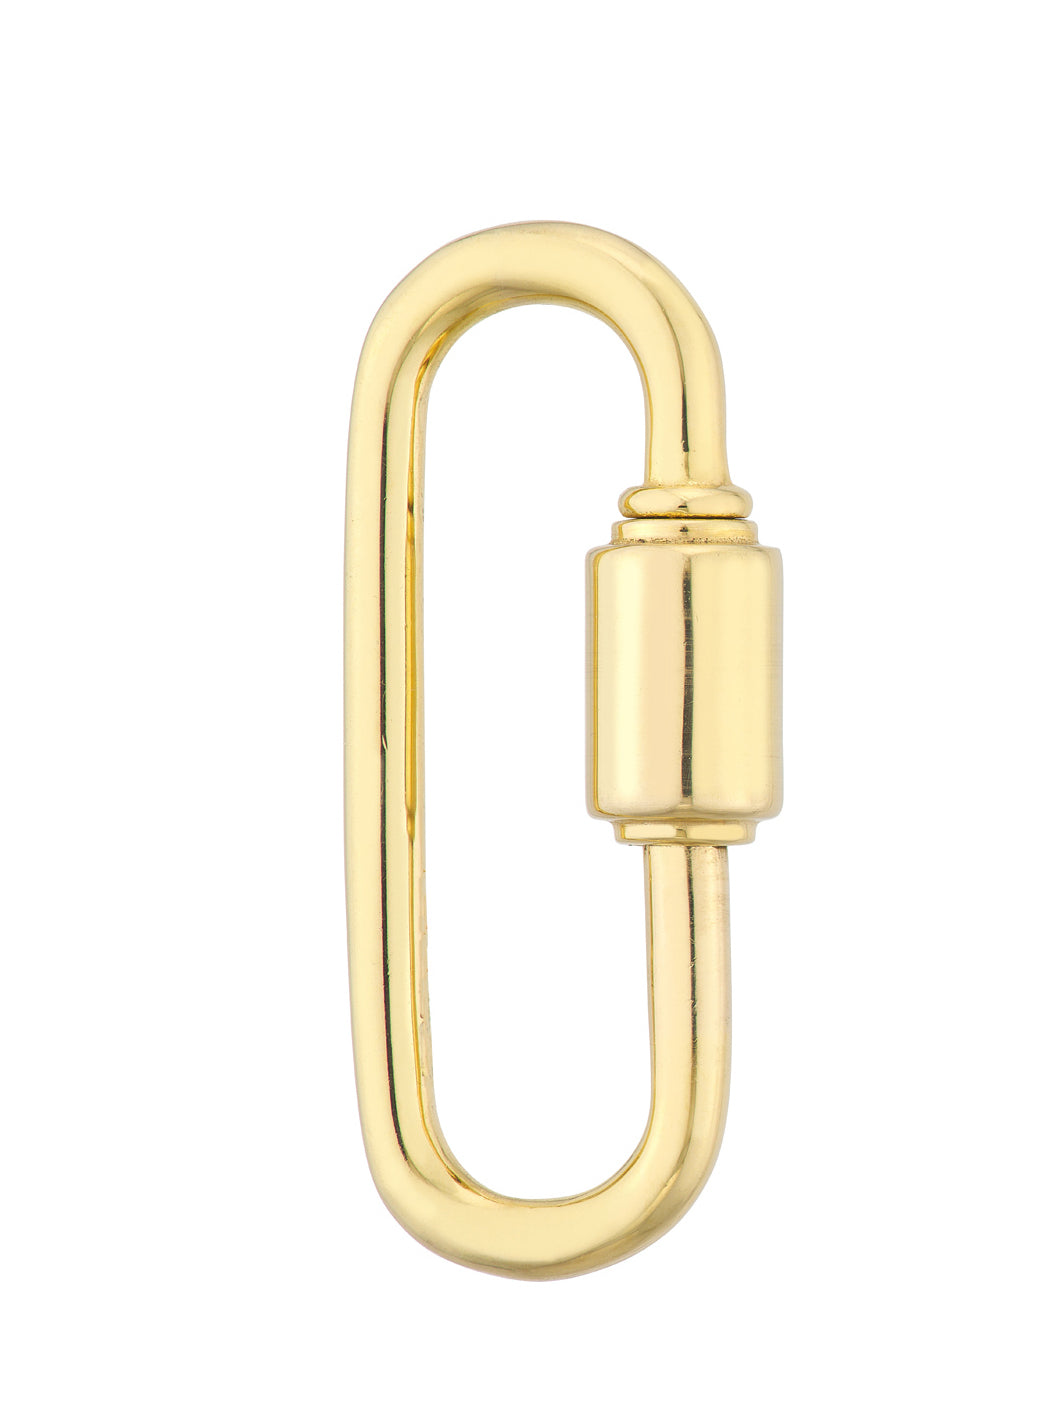 14k Yellow Gold Carabiner Oval Clasp Lock Connector Pendant Charm Hanger Bail Enhancer